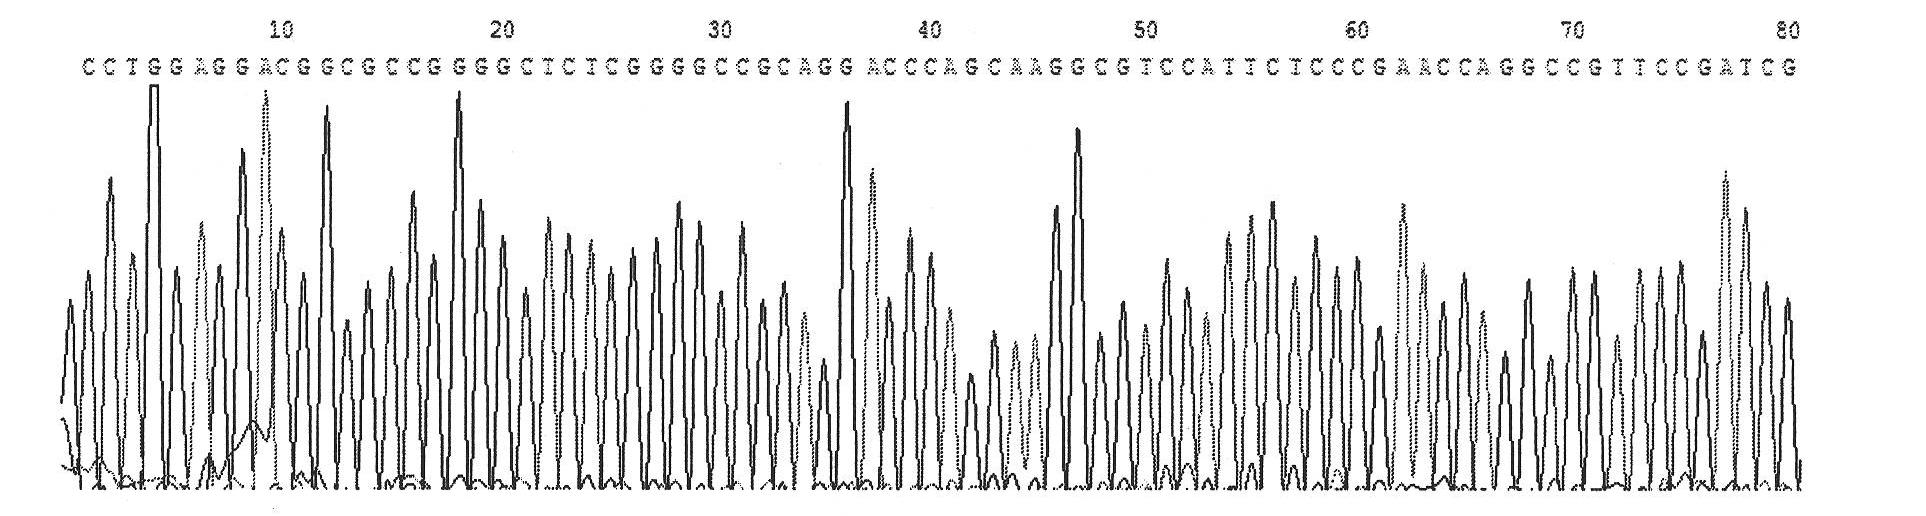 Kit for amplifying herpes simplex virus (HSV)-1 alkali nuclease gene and method for expressing HSV-1 alkali nuclease